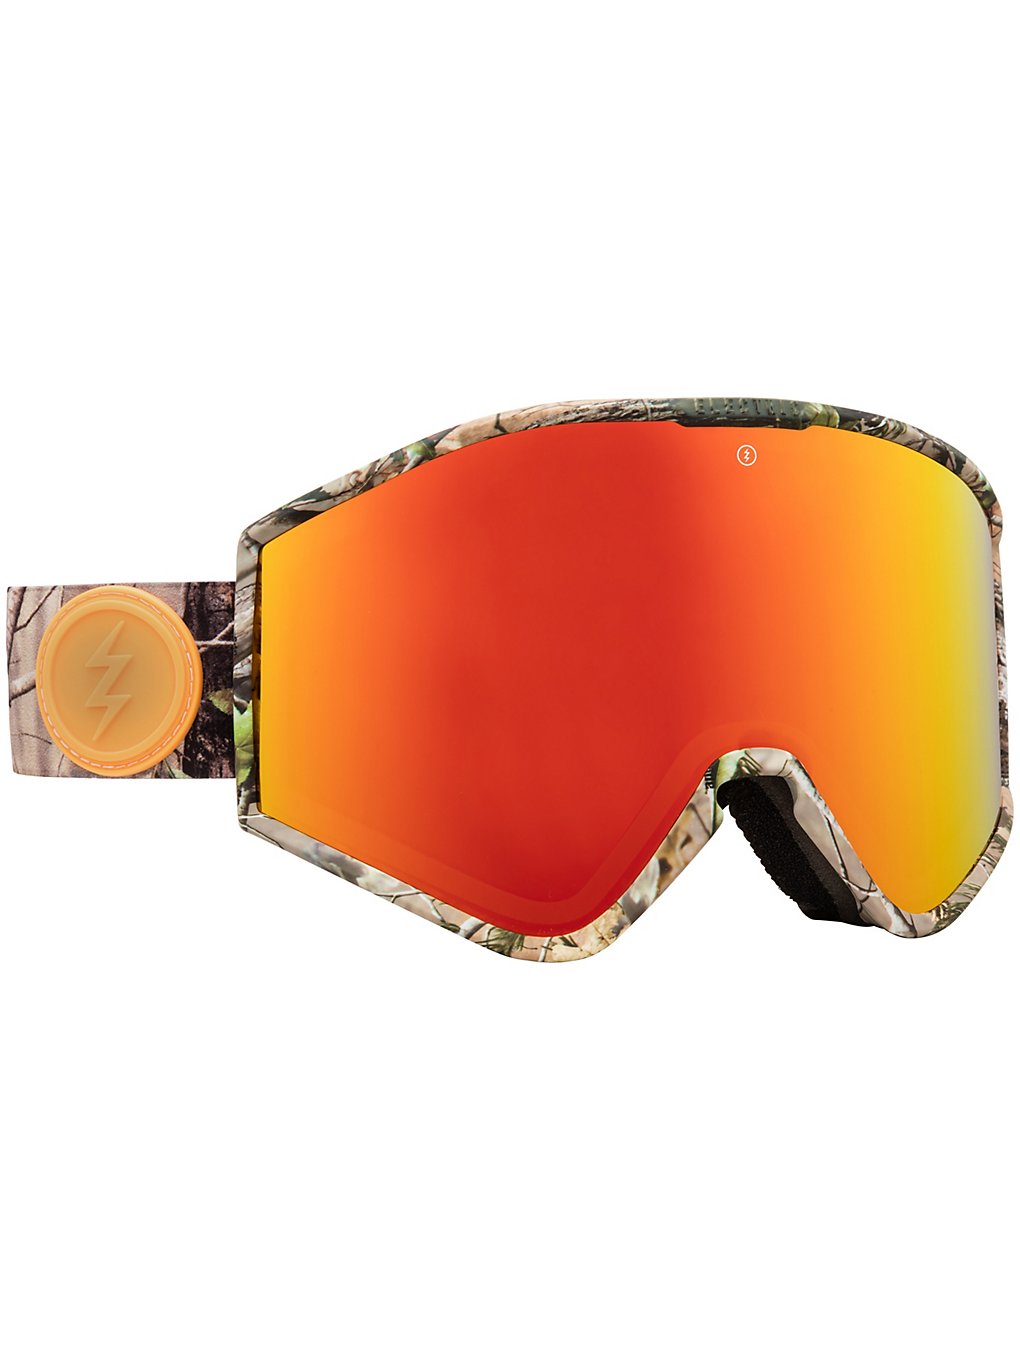 Electric Kleveland Realtree Goggle red chrome